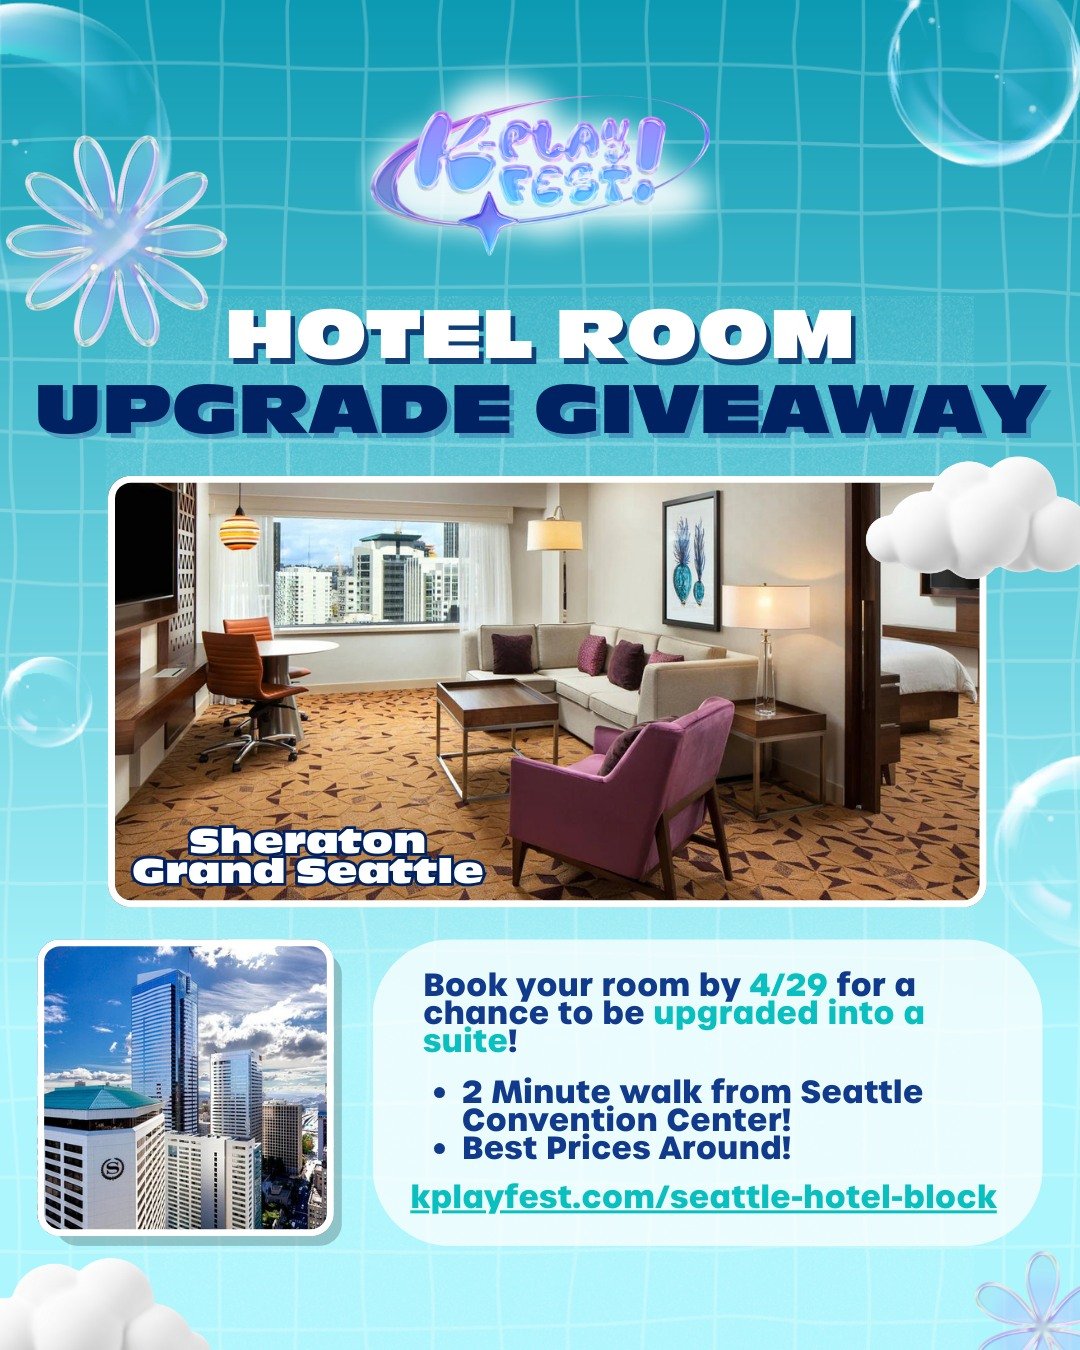 🚪 Knock on my door 💕 K-Players! We have a little special opportunity for you ✨ If you book your hotel room (using our hotel block 😉) by April 29th, you will have a chance for your room to be UPGRADED! 

Already booked your room? No worries at all,